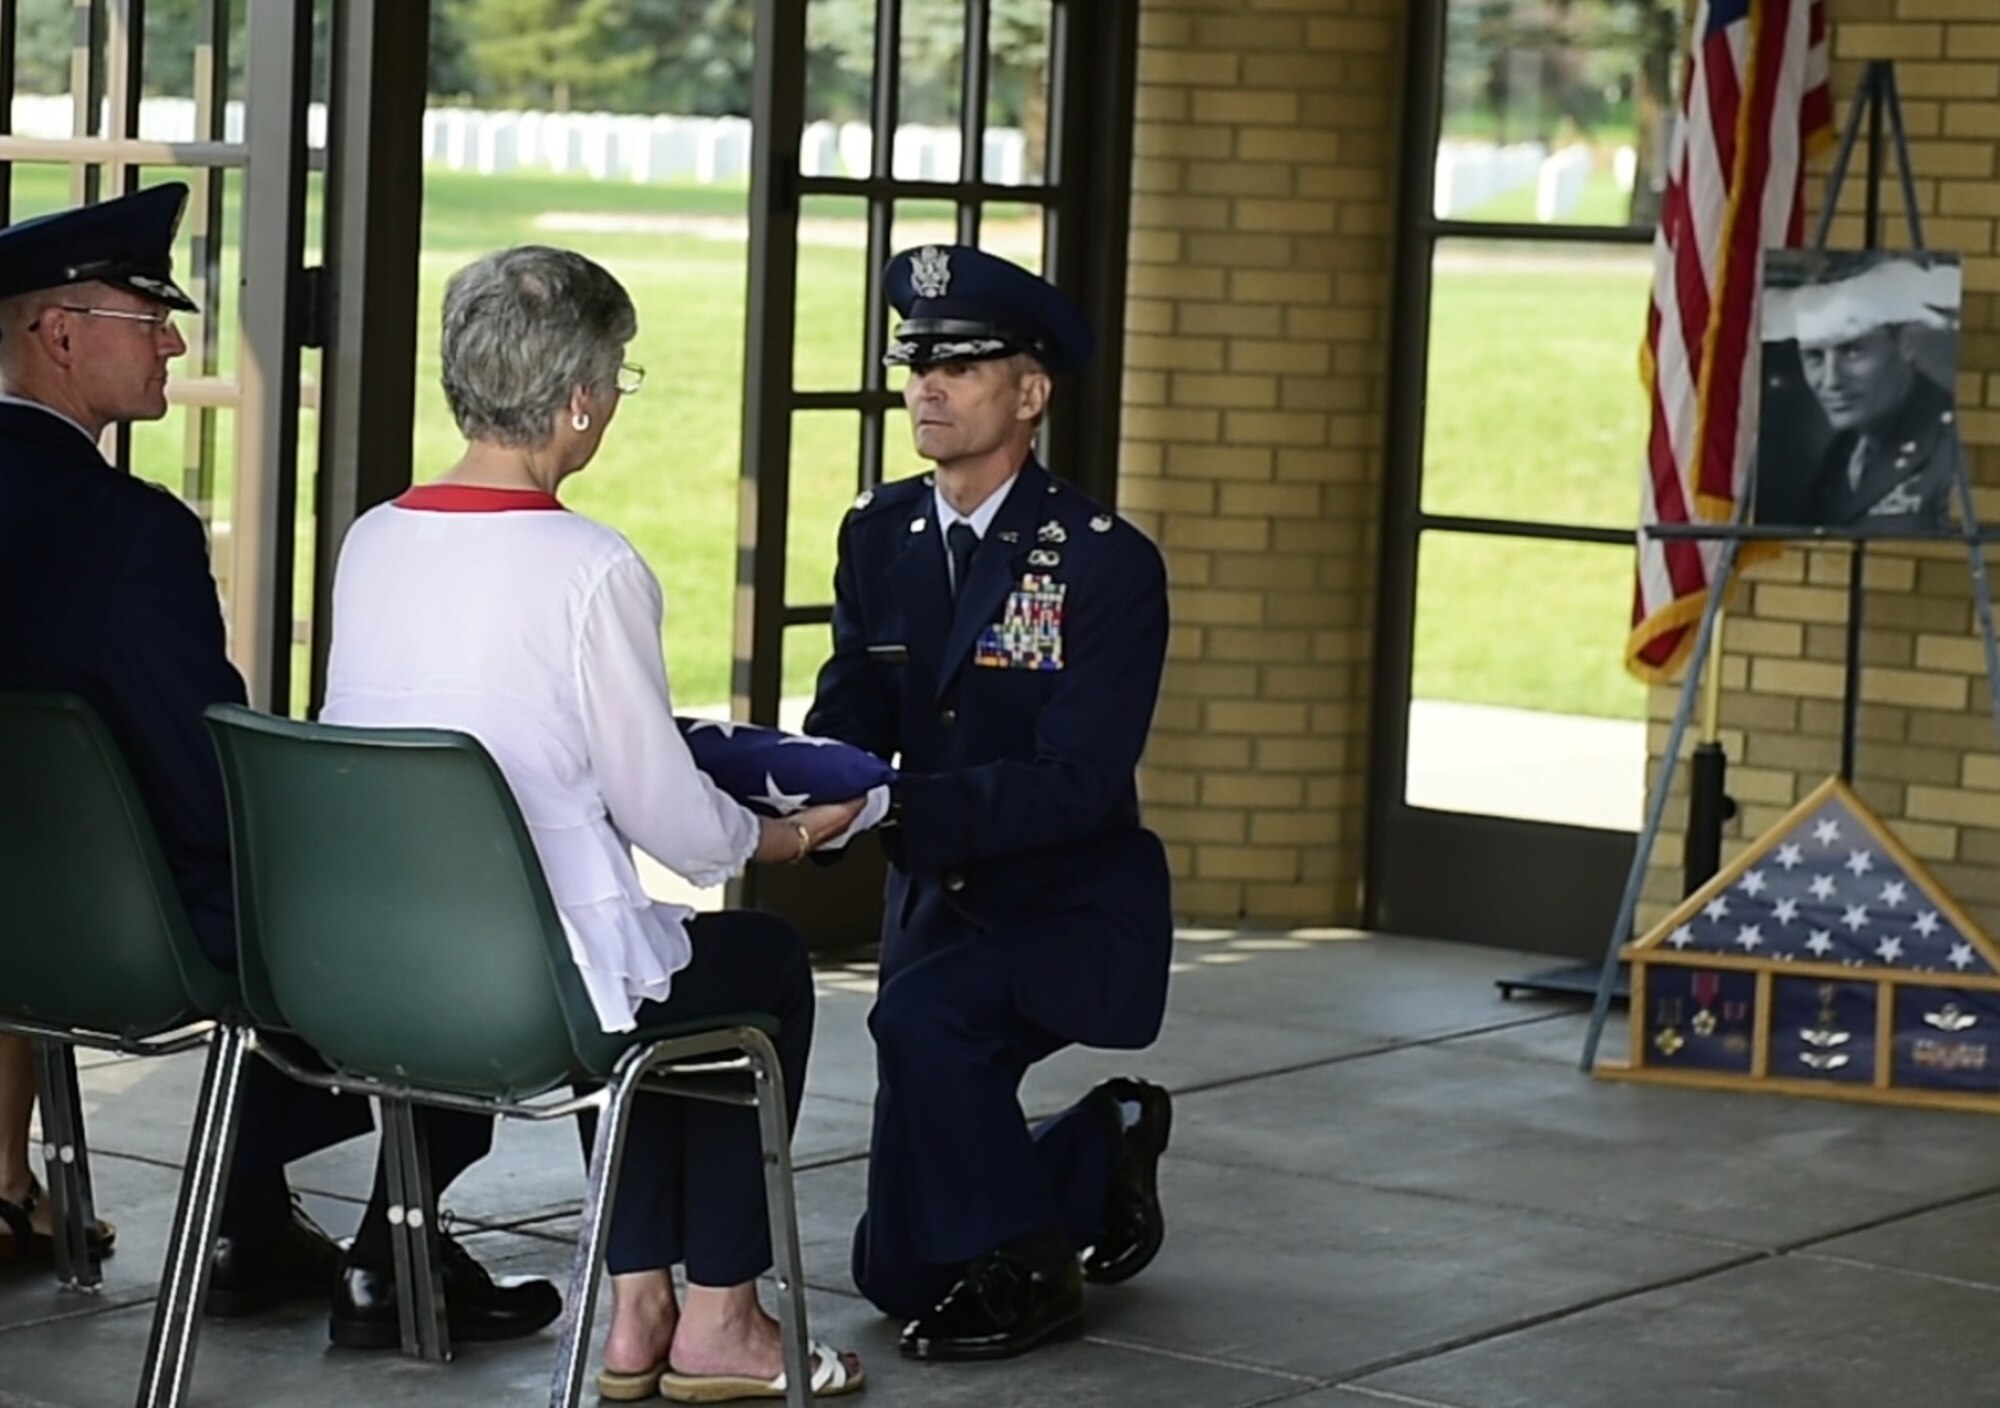 Lt. Col. Thomas J. Nefe, Director of Resources and Readiness, 240th Civil Engineer Flight, Colorado Air National Guard, Buckley AFB, presents the American flag to Linne (Royal) Haddock during the memorial service at Logan National Cemetery in Denver for Haddock’s father, Col. Frank Royal, who passed away in November. Royal commanded the 39th Fighter Squadron during World War II in New Guinea, making one air-to-air kill July 4, 1942. (Photo by Senior Airman Alyssa Duprey, 460th Space Wing Public Affairs).